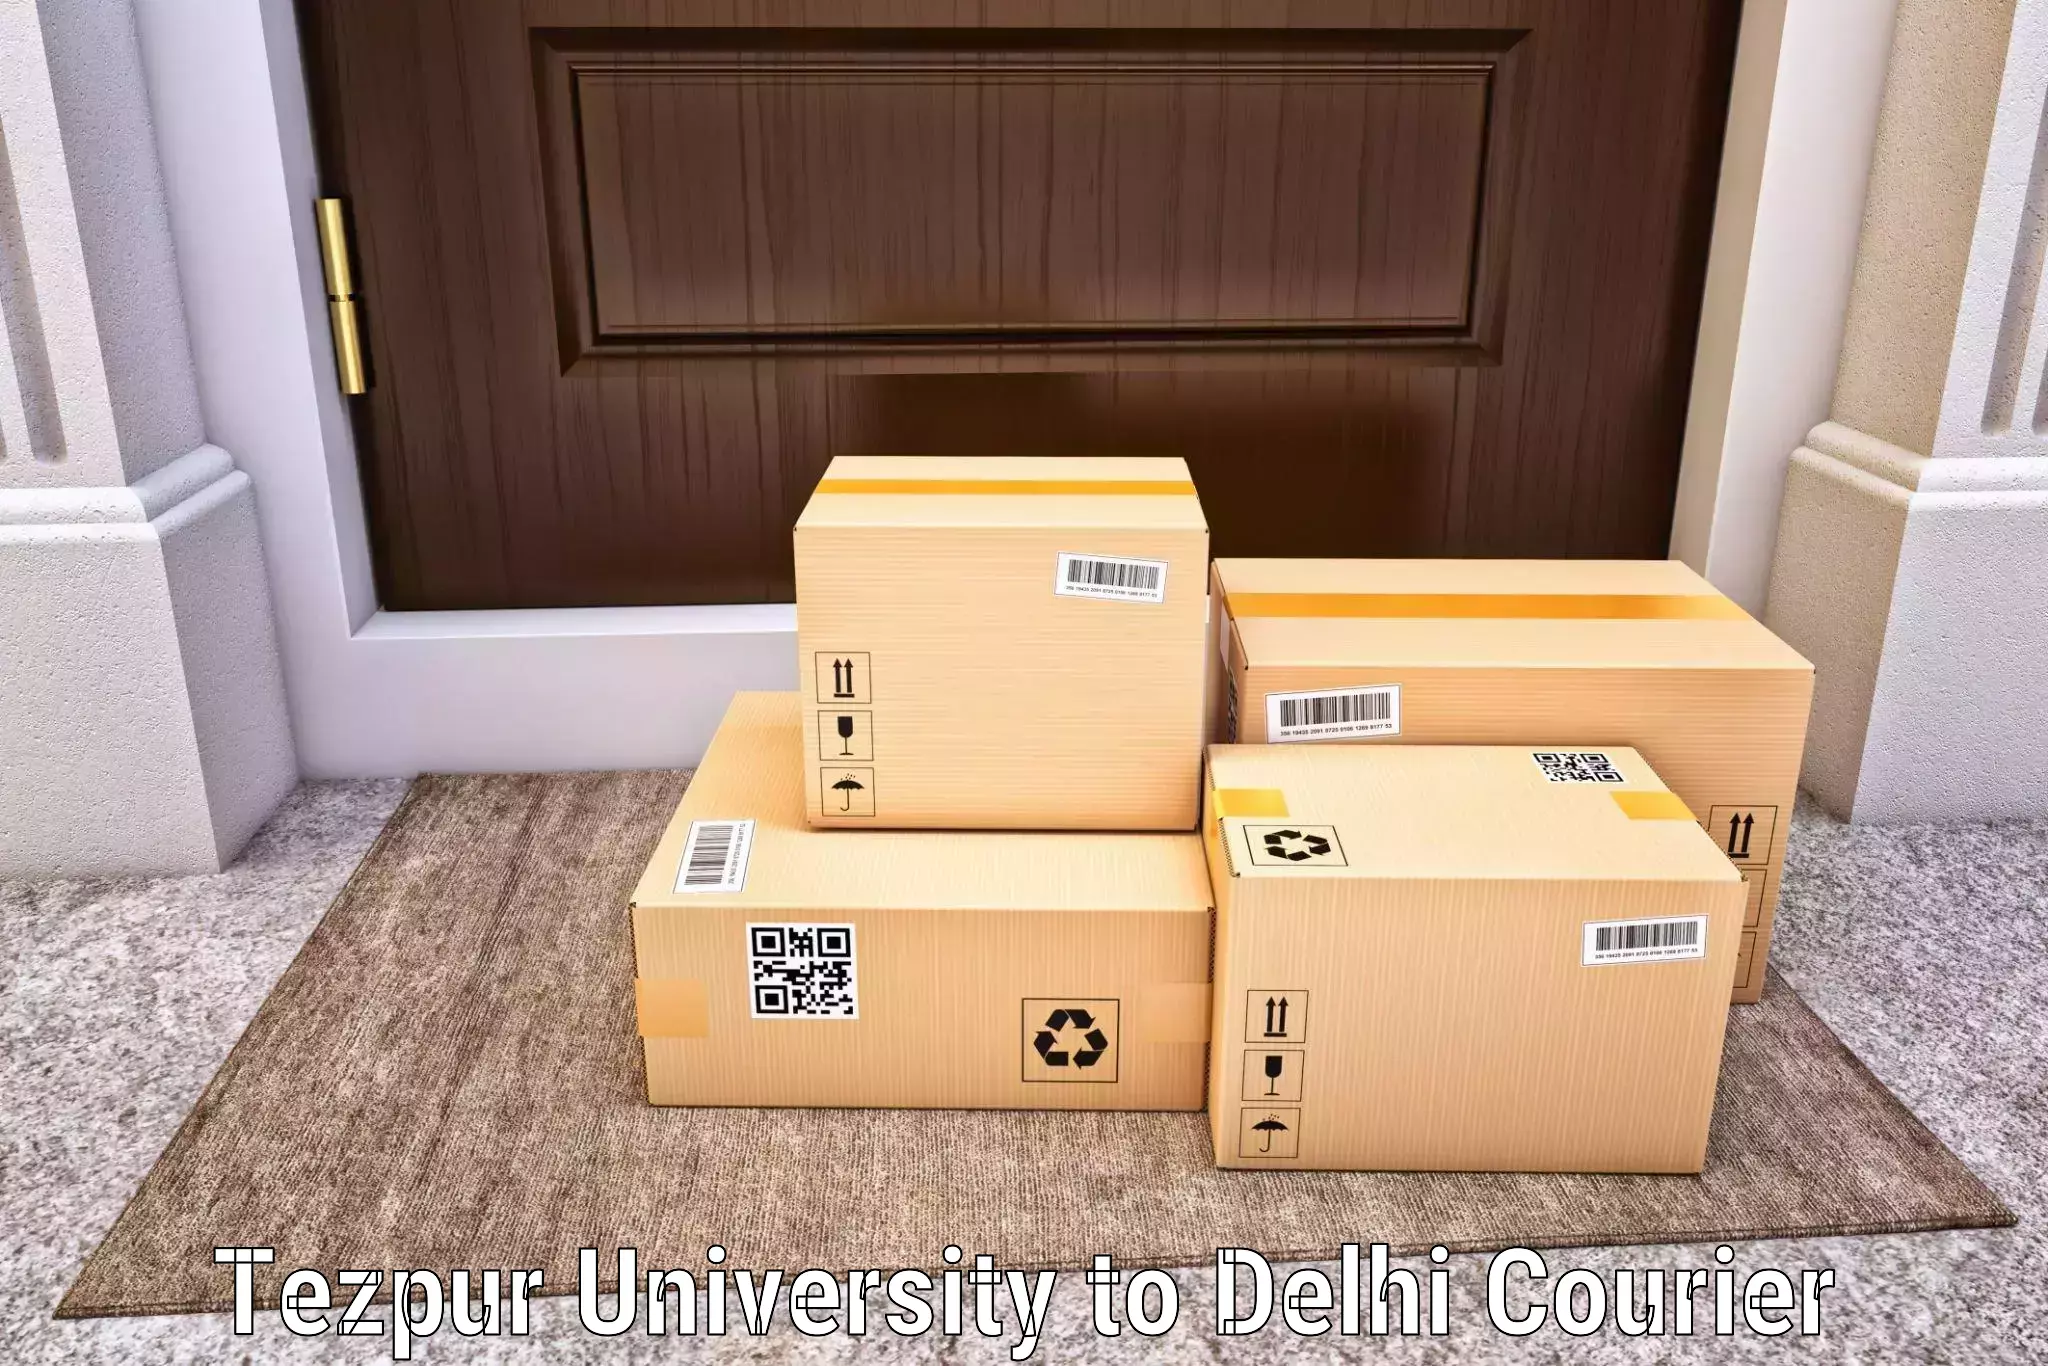 Next day courier Tezpur University to NCR